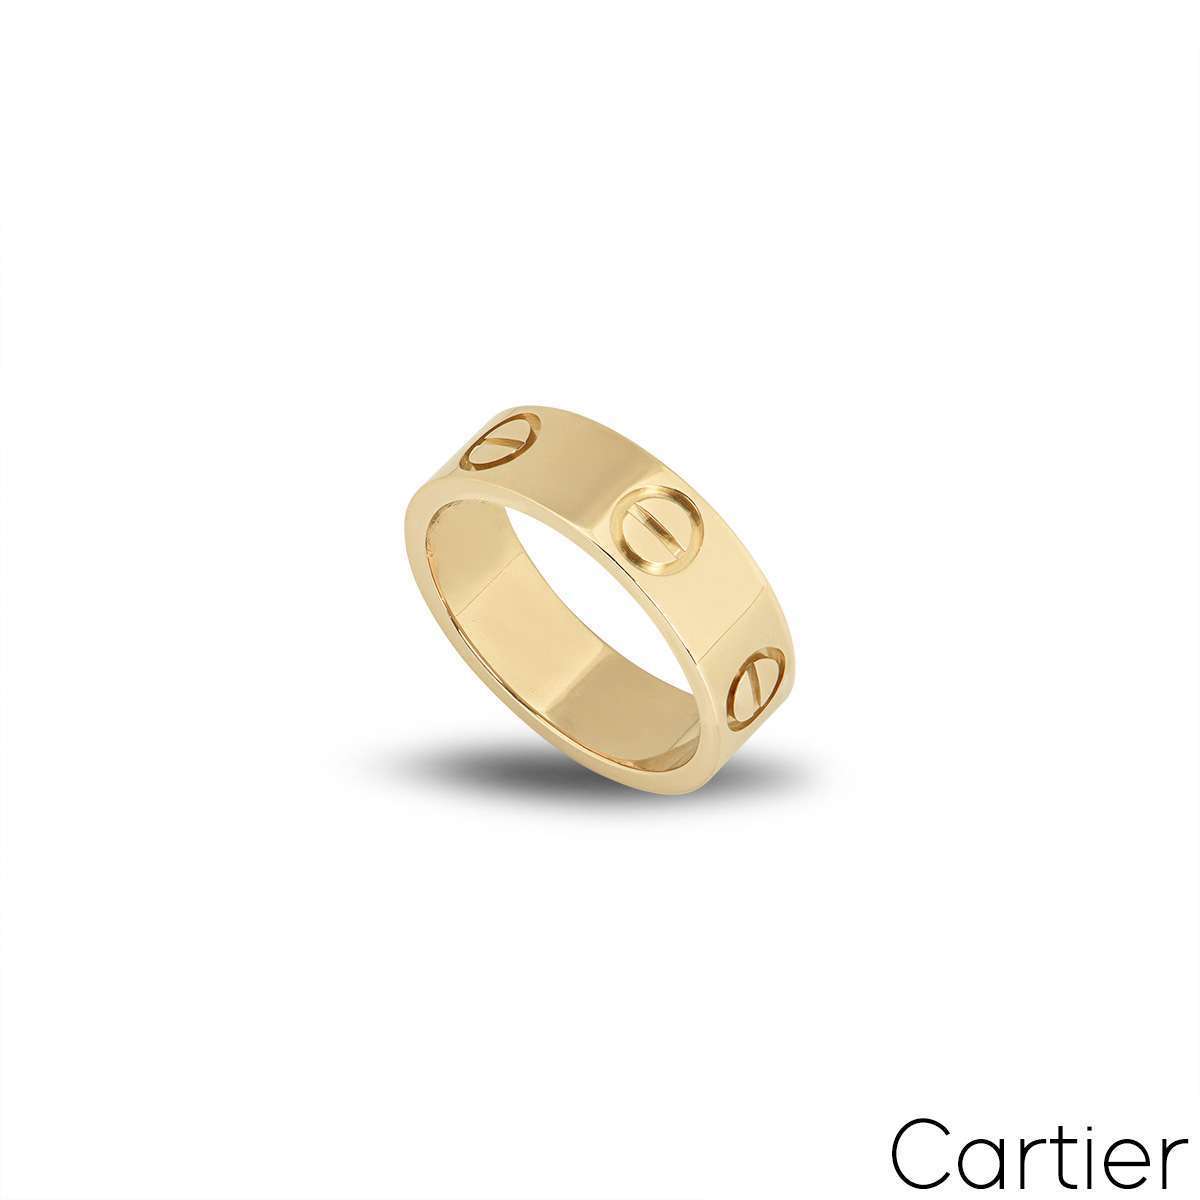 CARTIER LOVE RING CARTIER LOVE BAND COUPLES BAND #cartier #ring #nail love  ring wedding rings cartier eme… | Gold jewelry stores, Cartier love ring,  Fashion jewelry